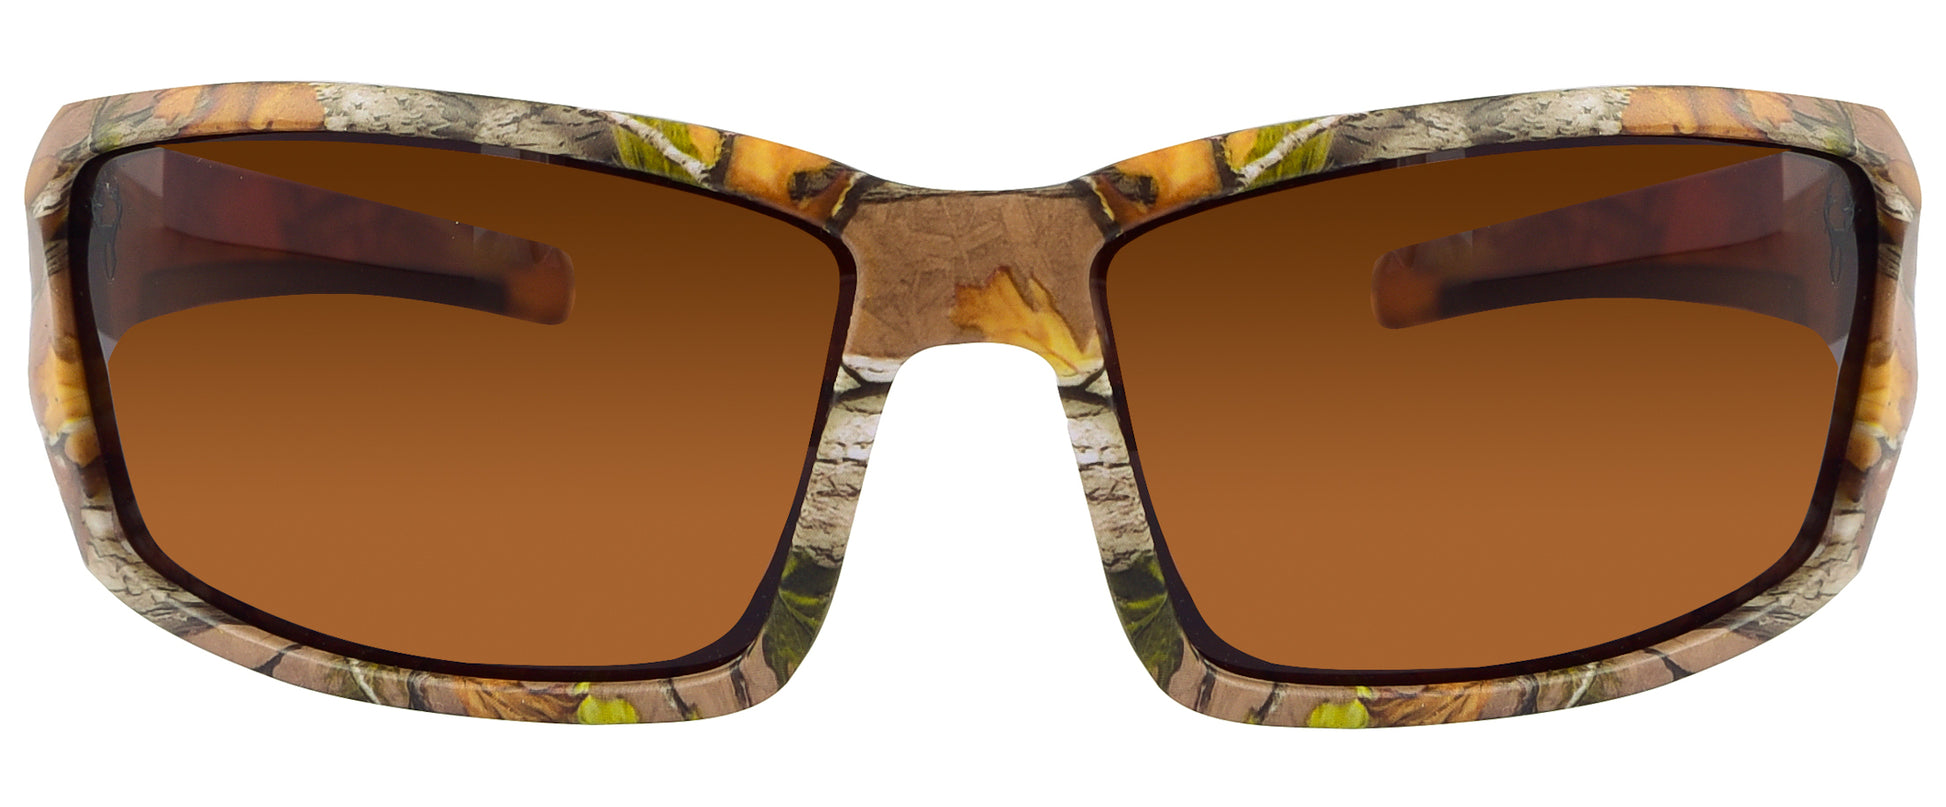 Third image: Hornz Brown Forest Camouflage Polarized Sunglasses for Men - Aquabull - Free Matching Microfiber Pouch - Brown Camo Frame - Amber Lens